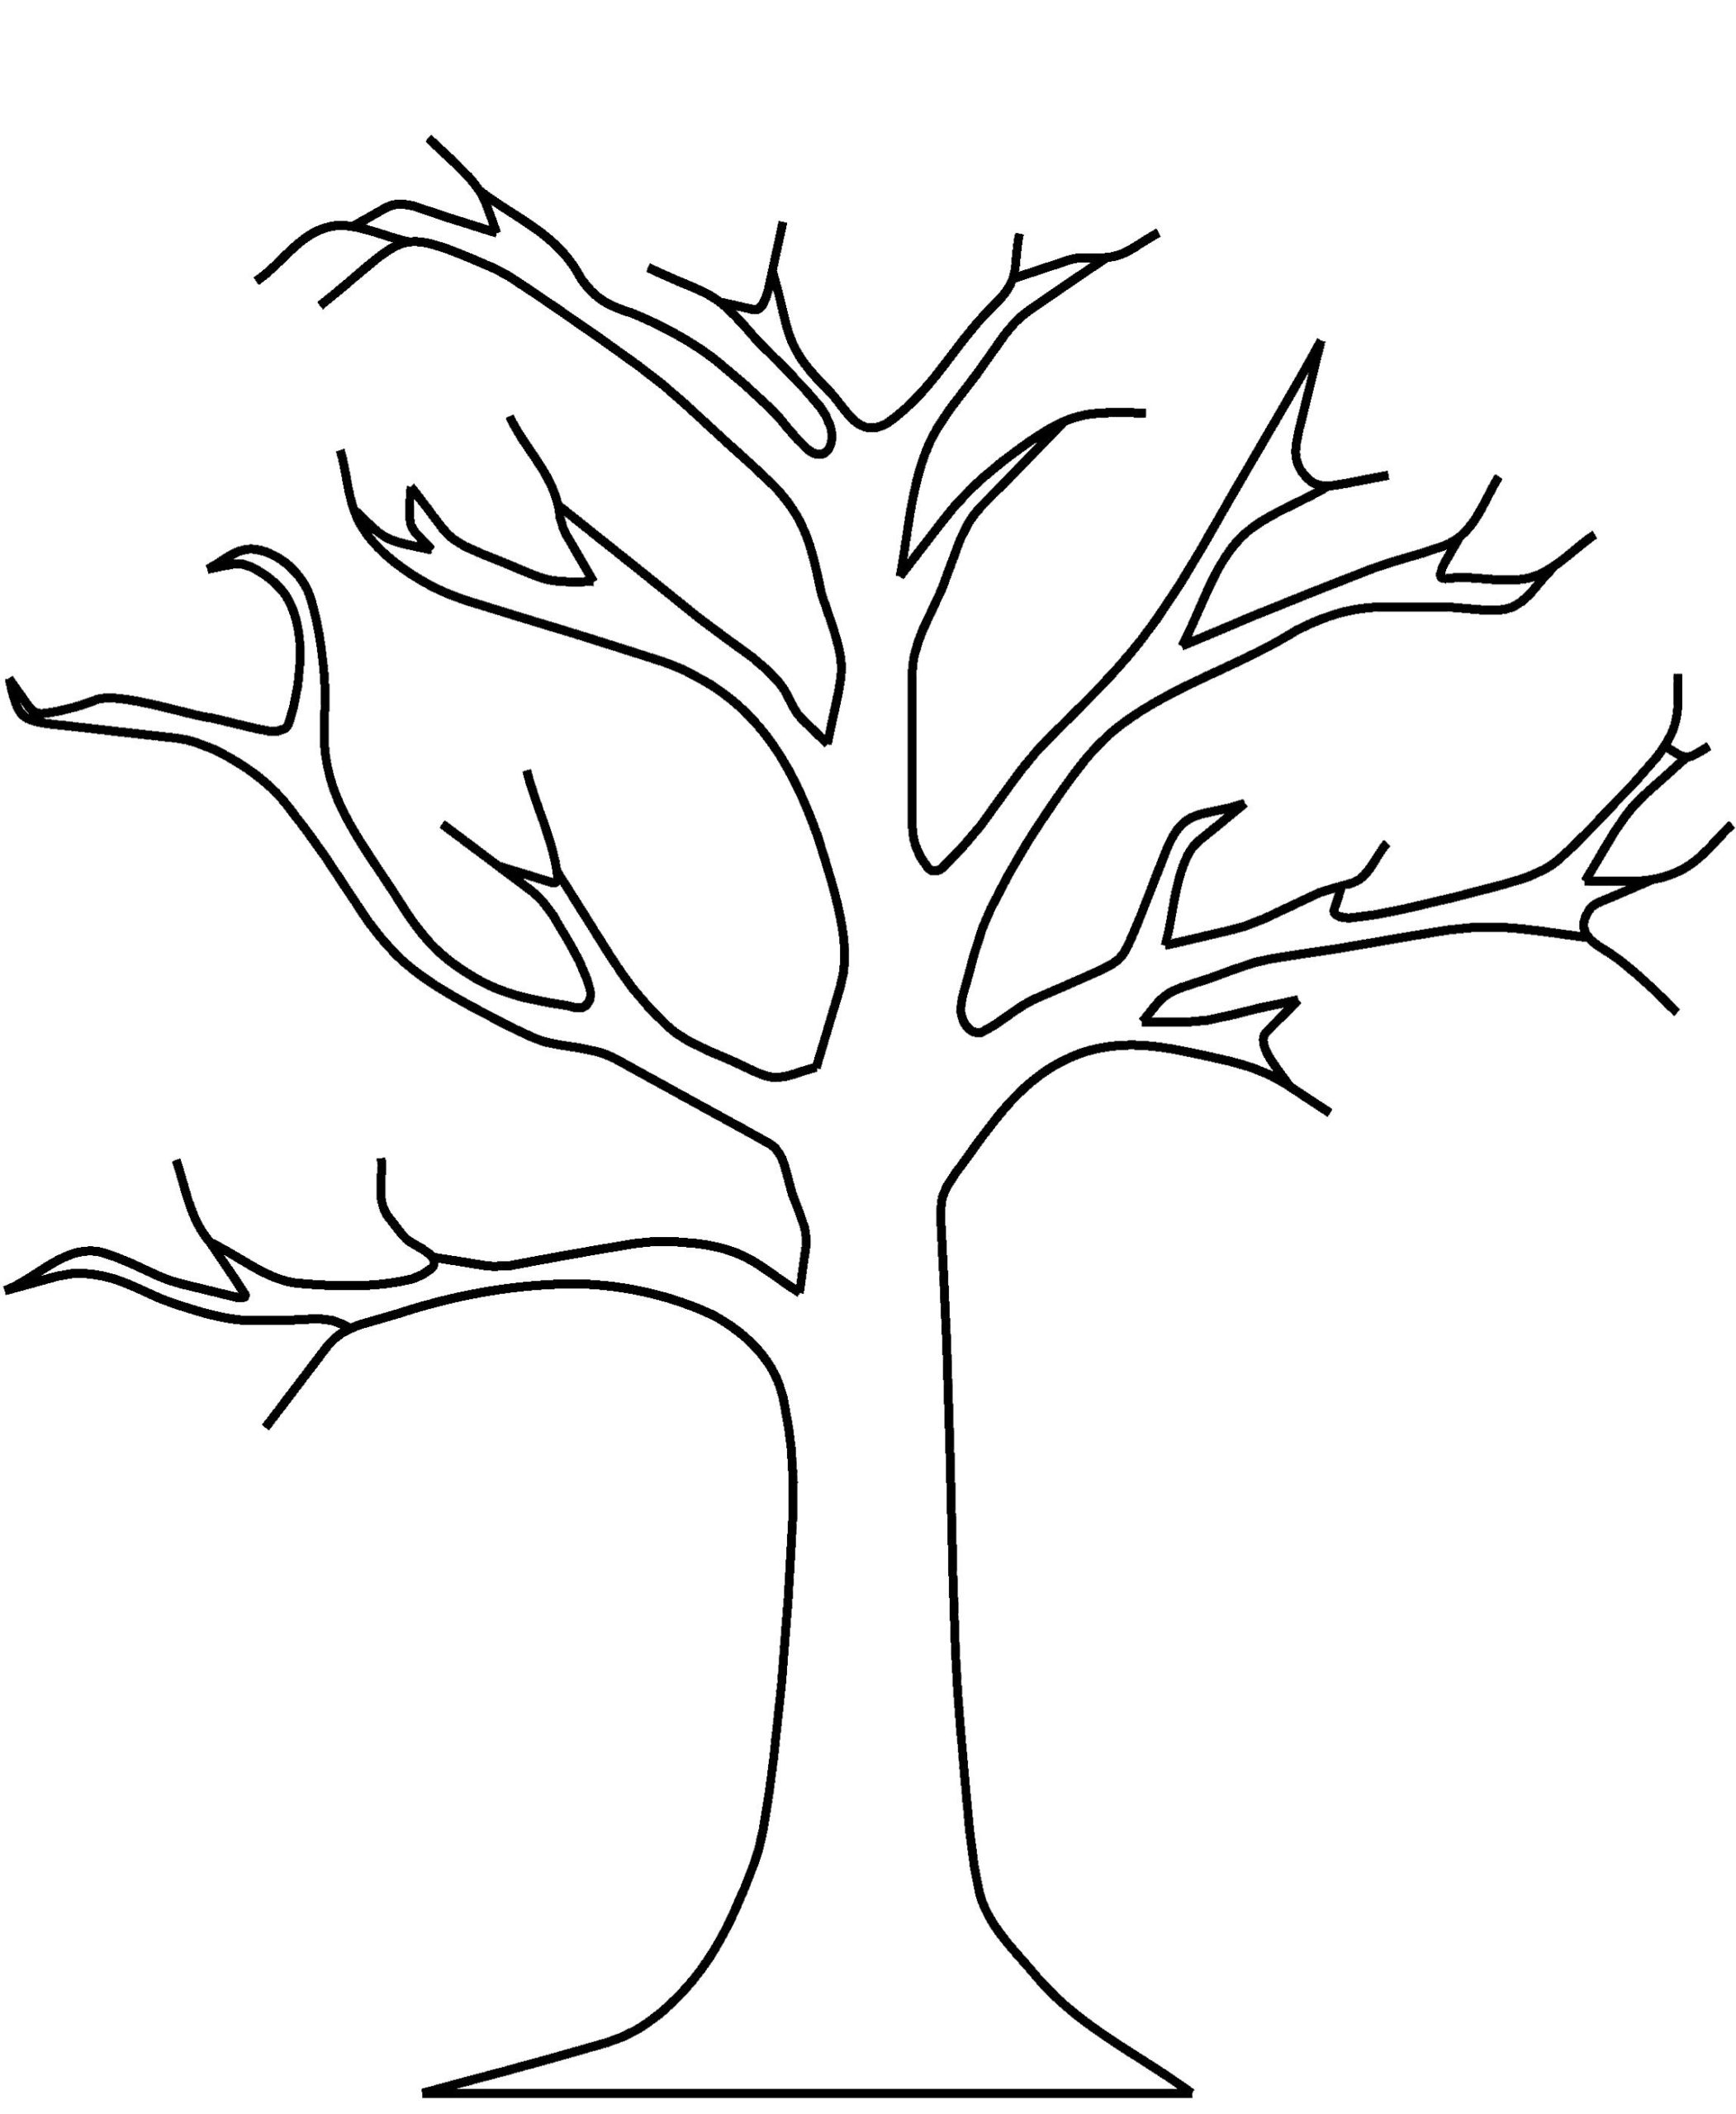 Coloring Pages : Autumn Tree Coloring Leaf Fall Leaves Sheet ...